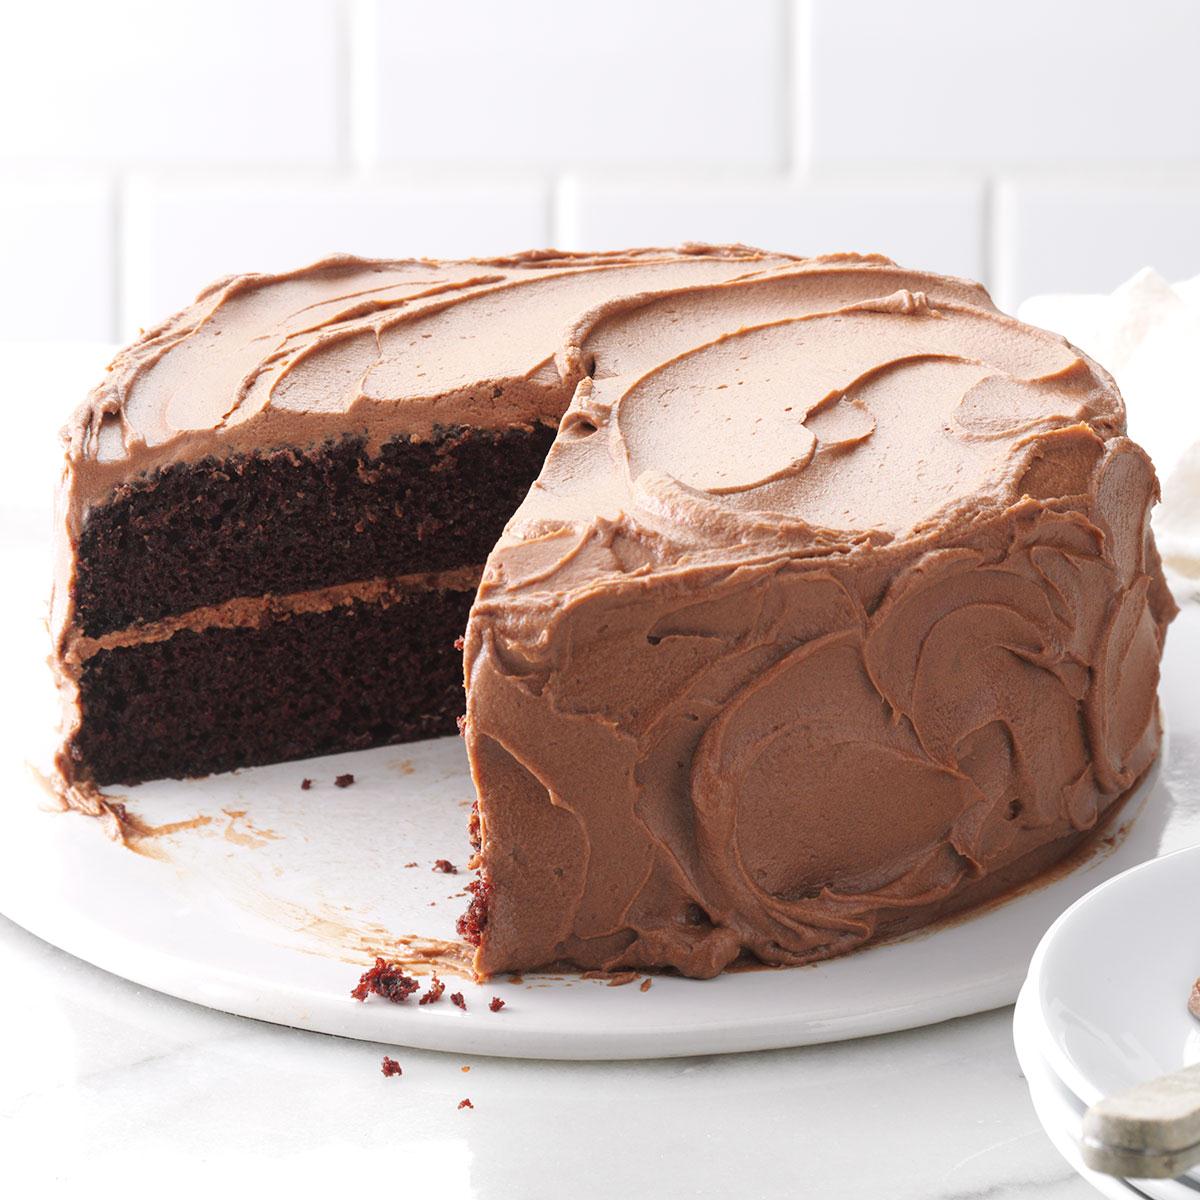 Chocolate Cake with Chocolate Frosting Recipe | Taste of Home